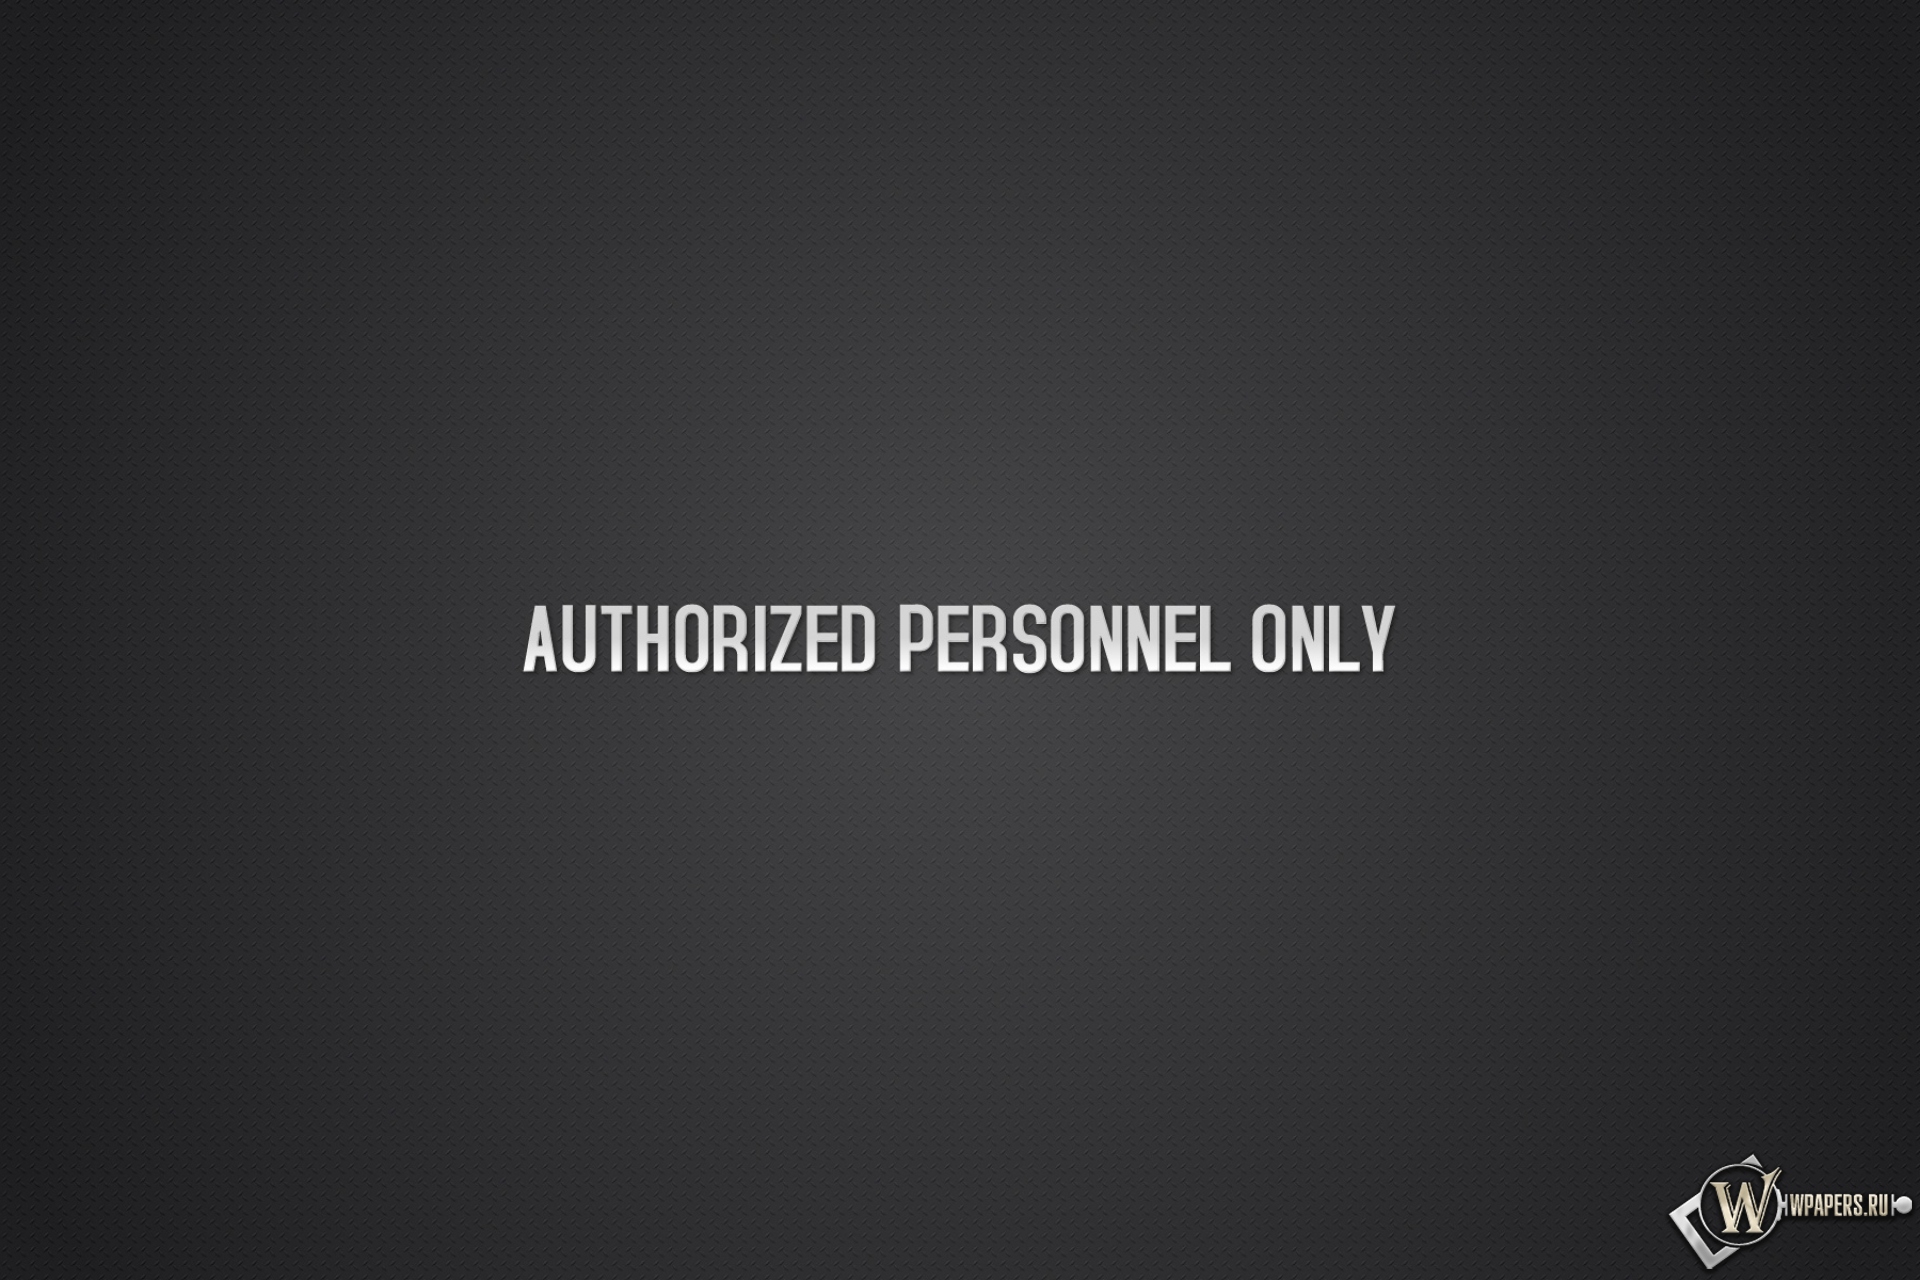 Authorized personnel only 1920x1280